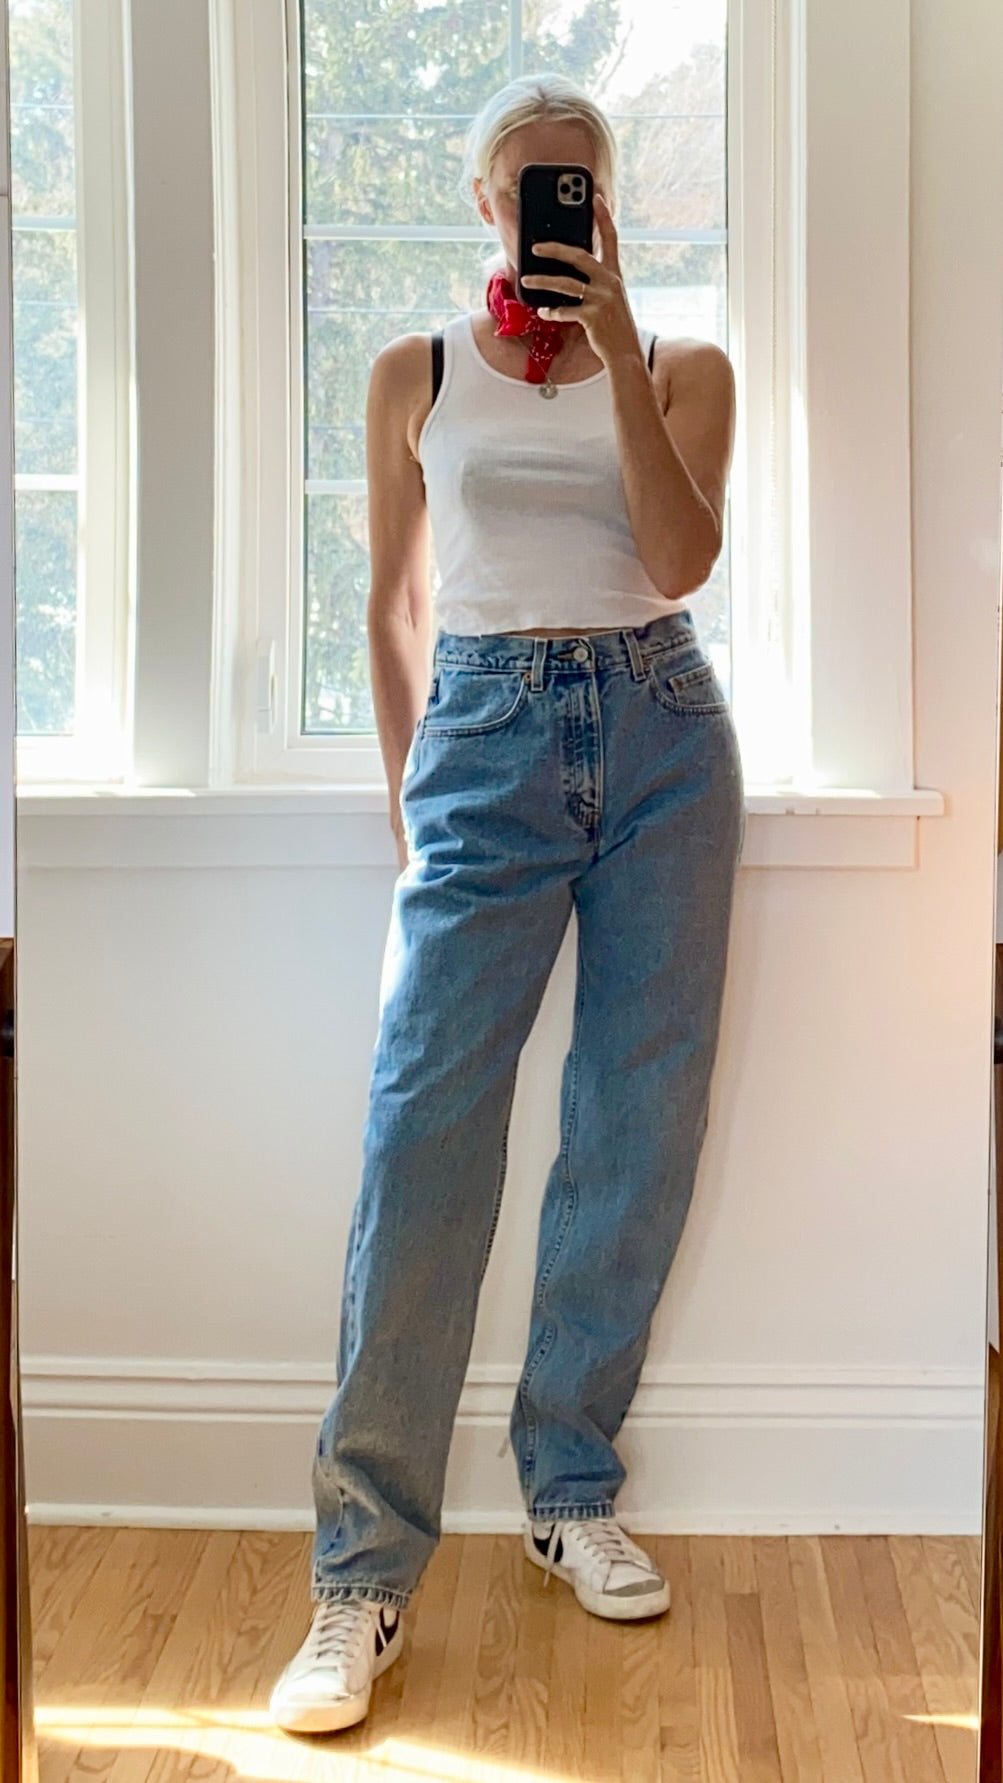 Vintage 1990s Levis Relaxed Fit Light to Medium Wash Jeans size 31